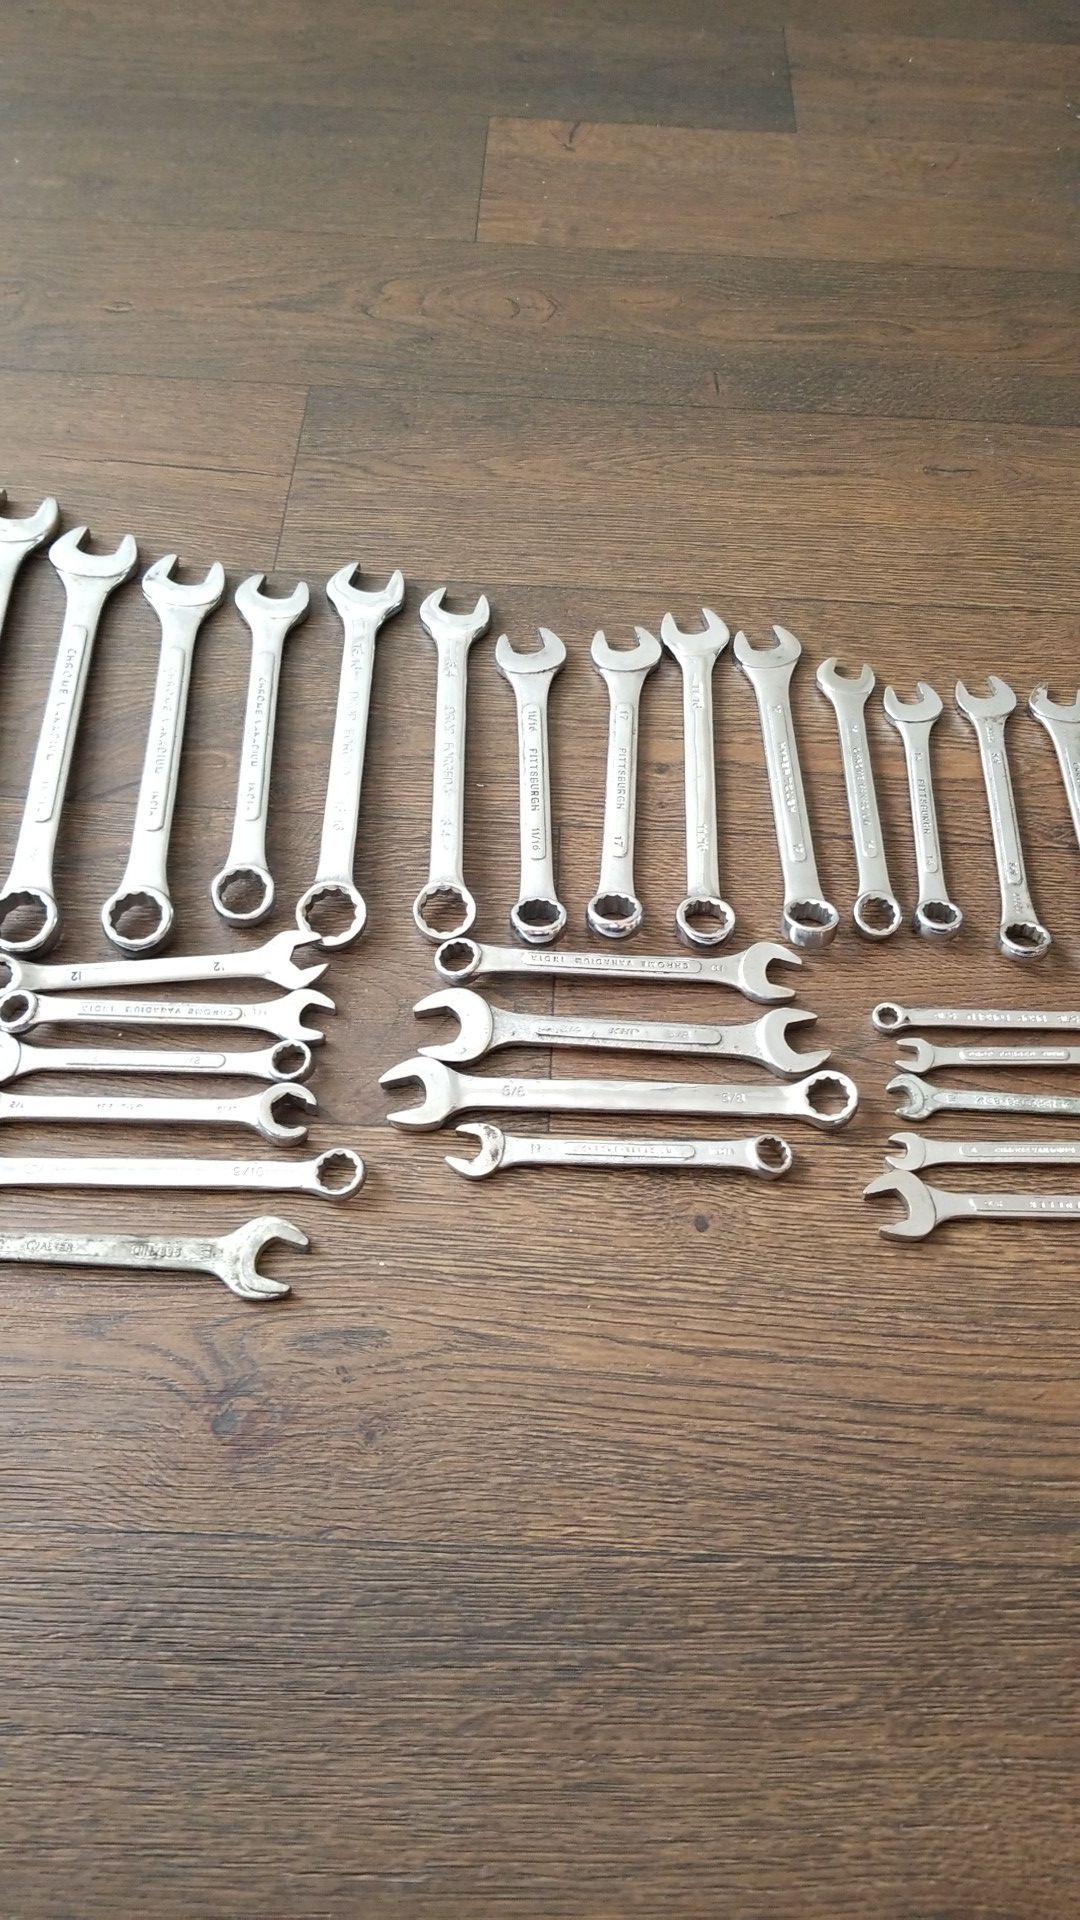 30 open end wrenches